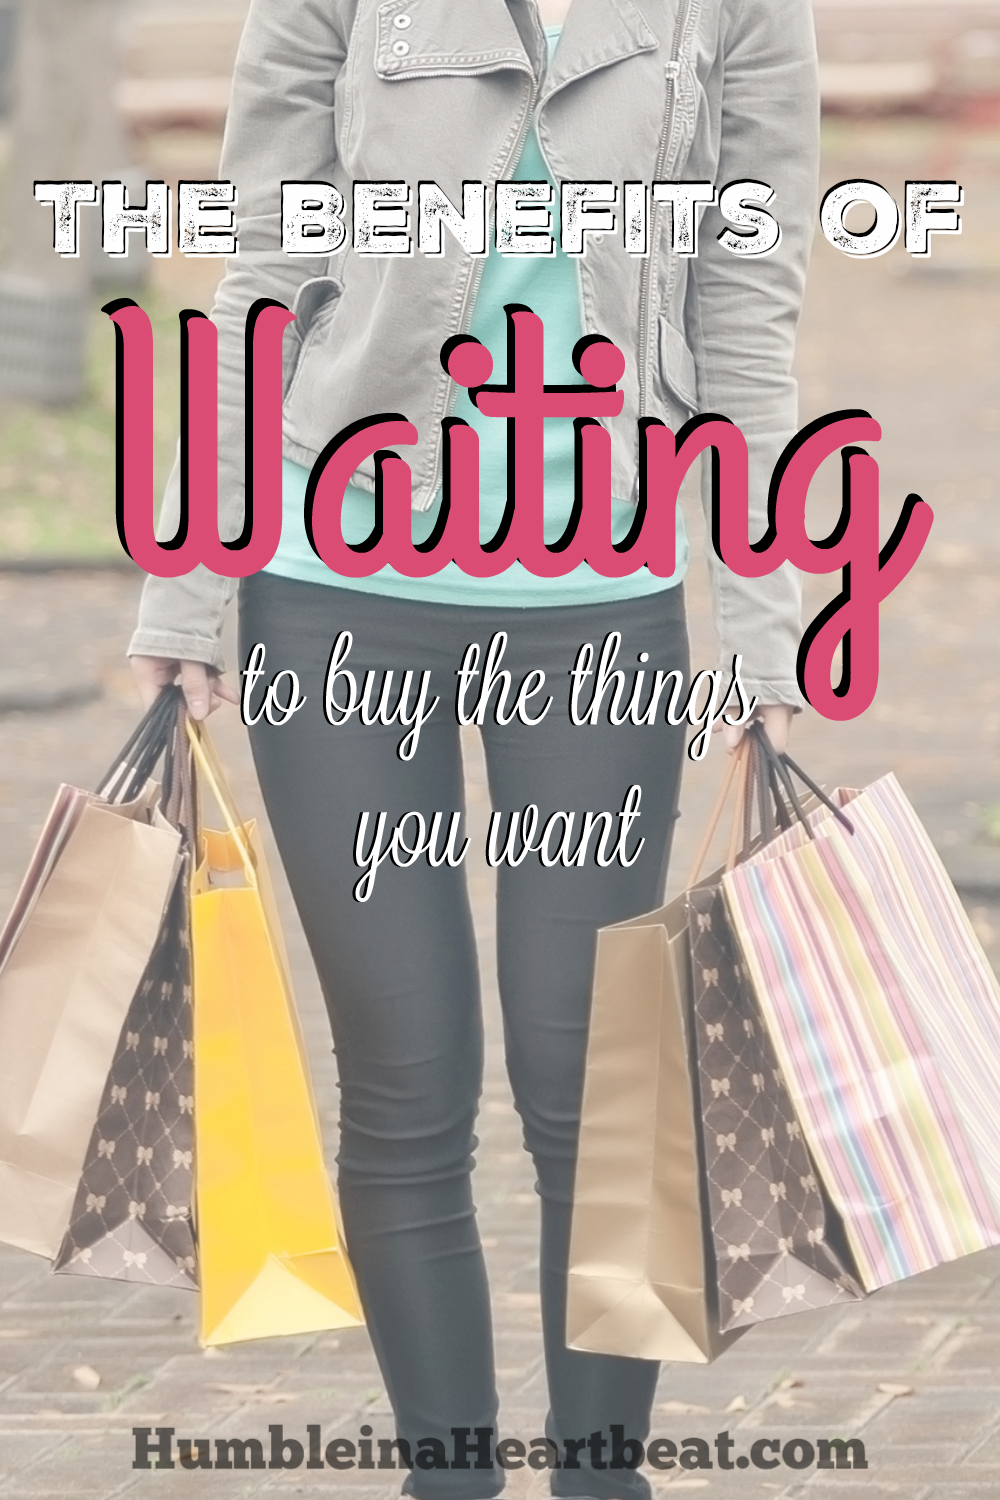 Delayed gratification actually has some wonderful benefits. The next time you want to buy something, try waiting for some time before getting it. You might be surprised how much willpower you have!